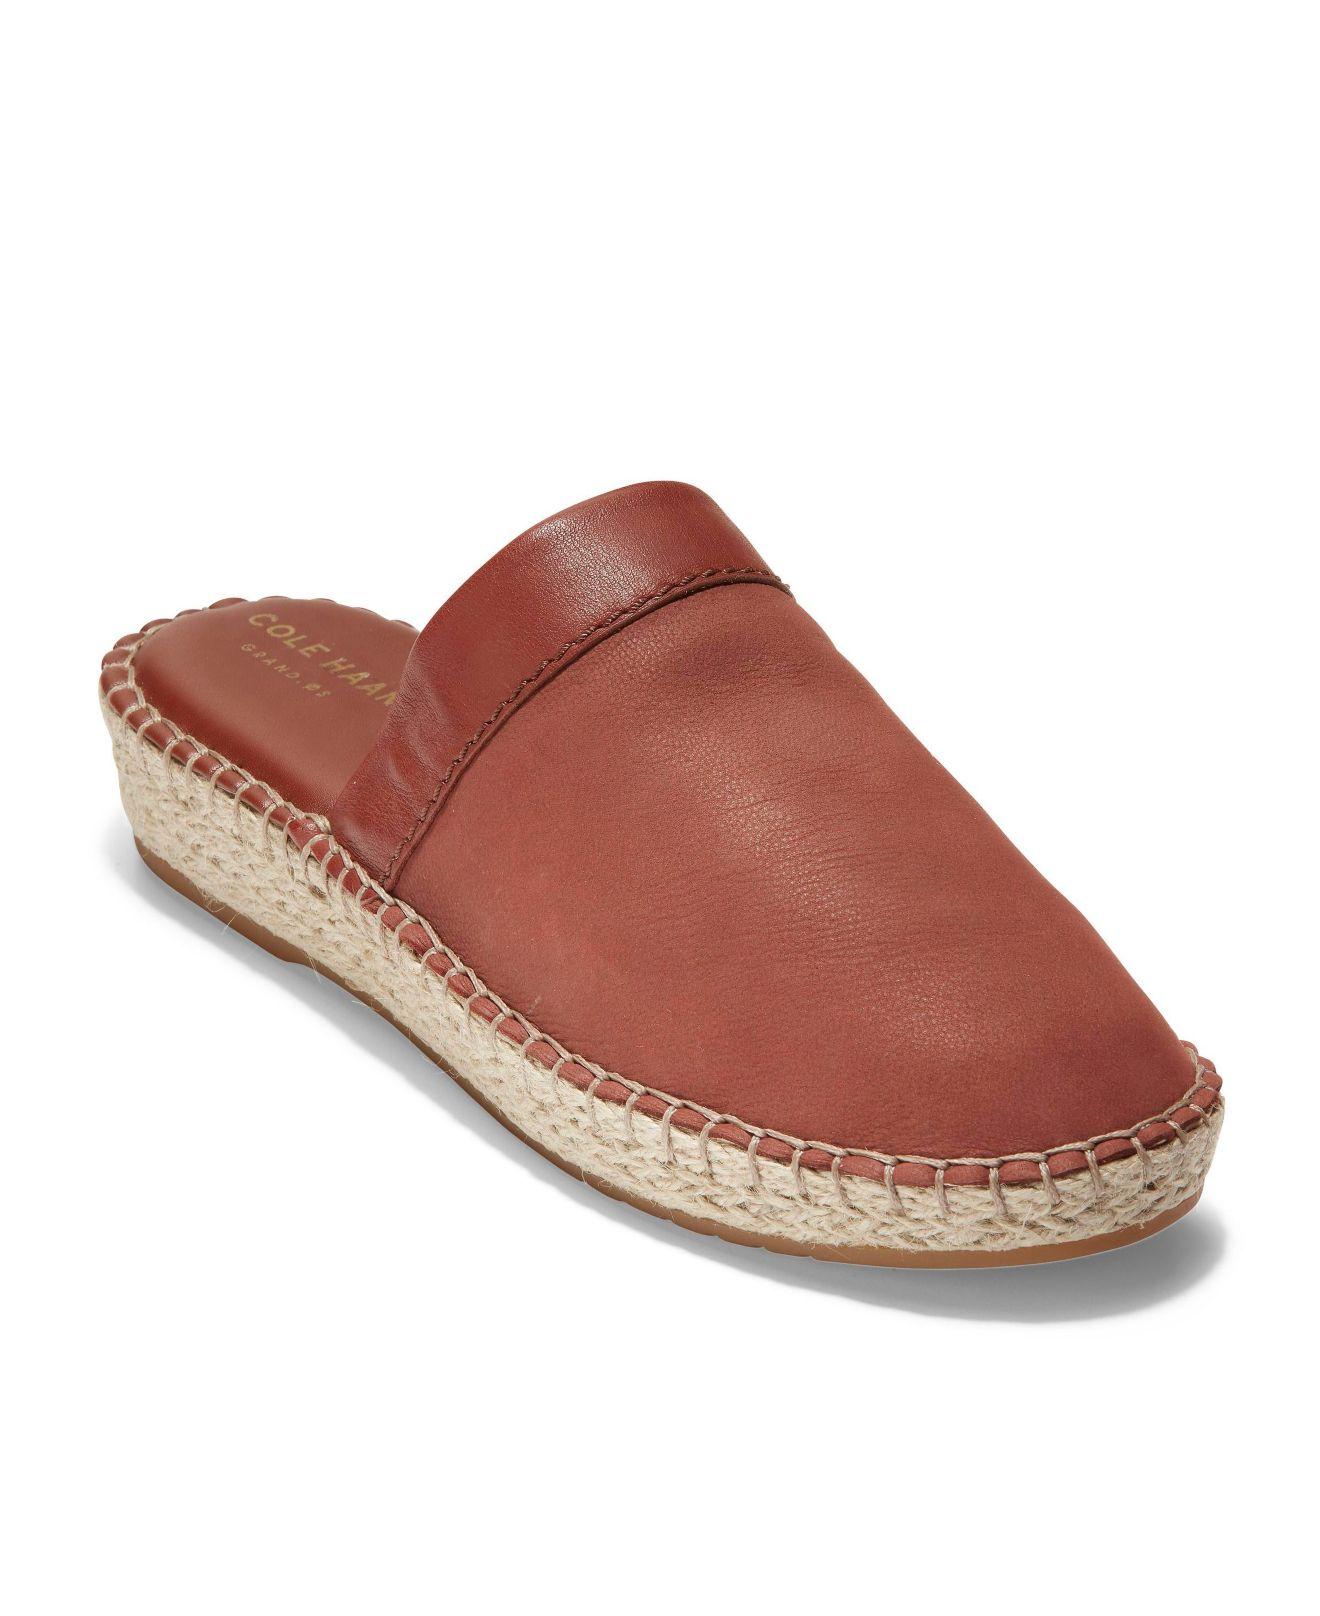 Cole Haan Leather Cloudfeel Espadrille Slides in Cherry Nubuck Leather ...